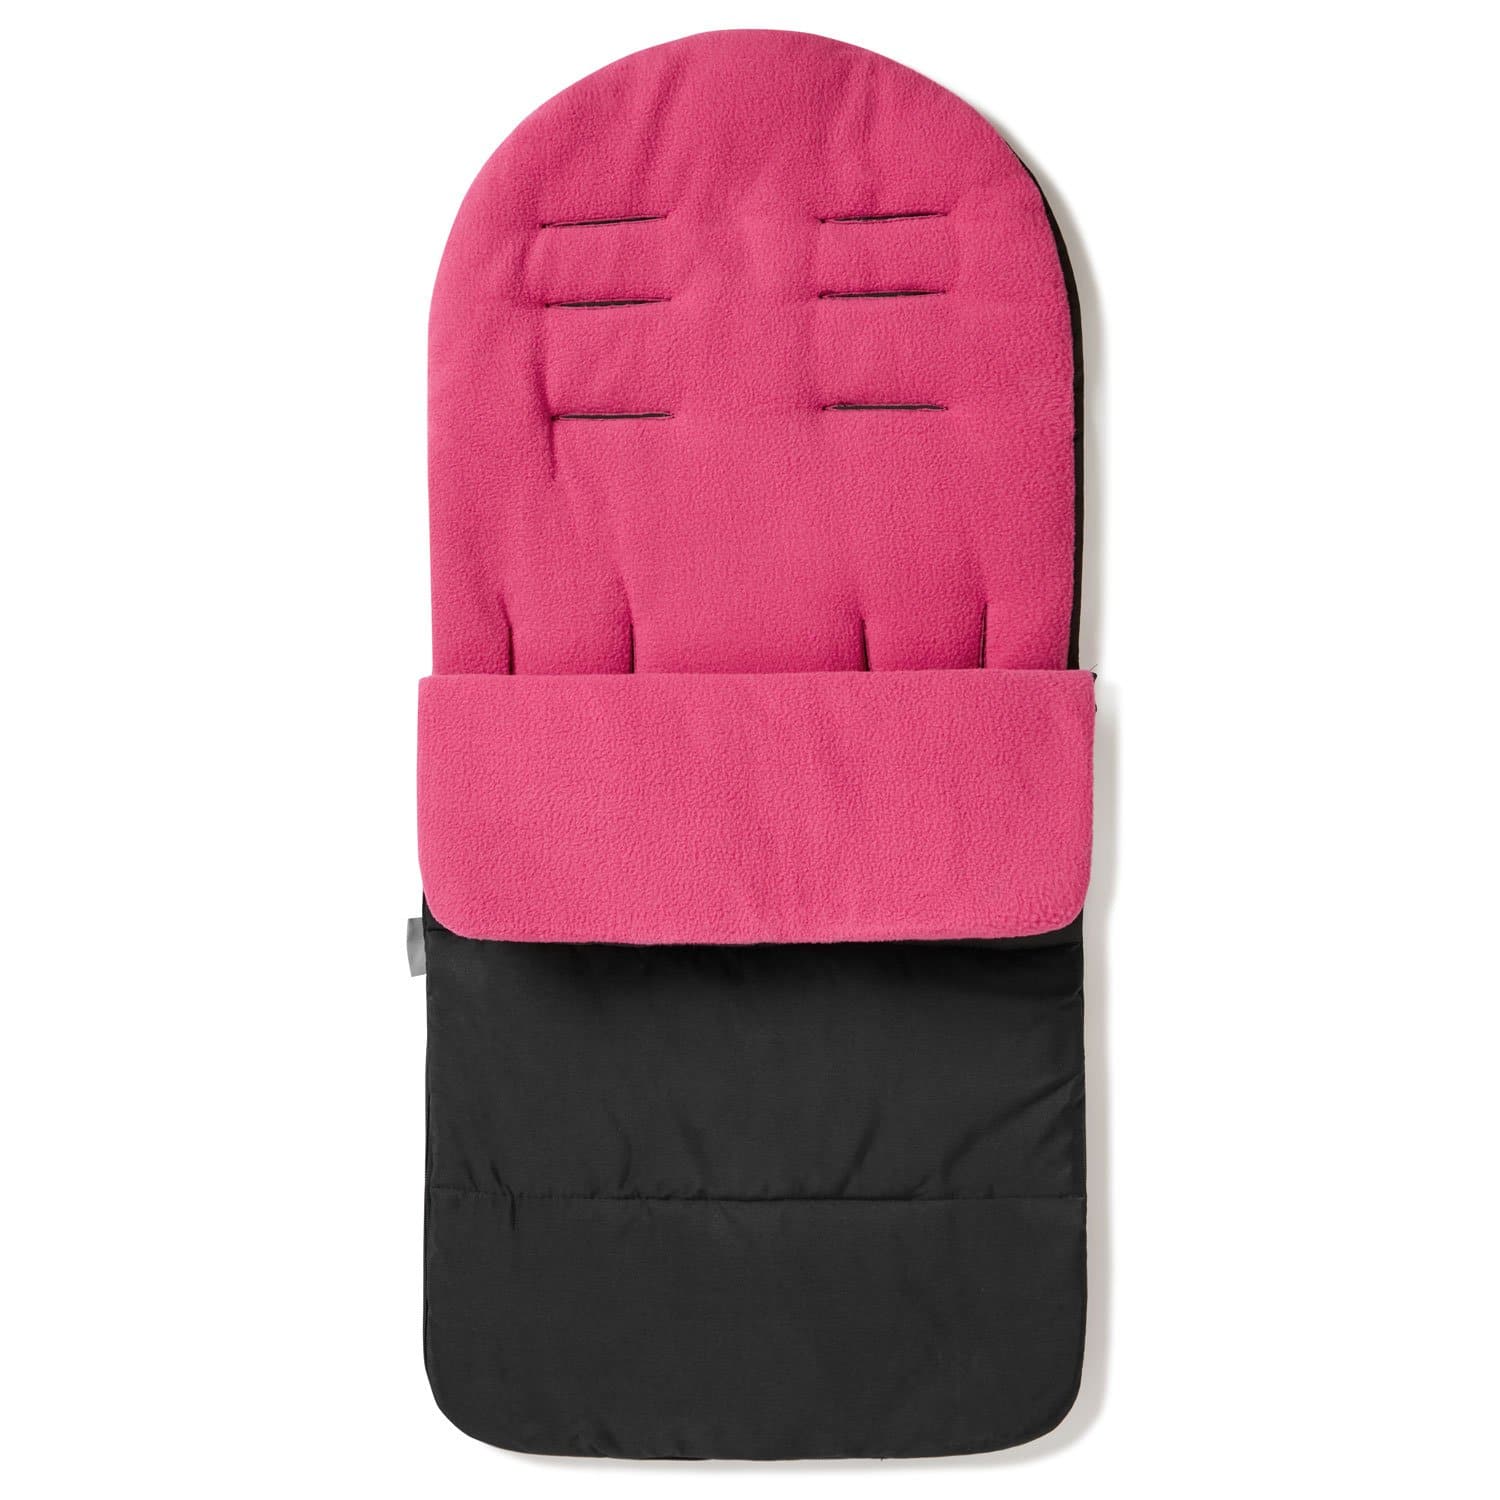 Premium Footmuff / Cosy Toes Compatible with Safety 1st - Pink Rose / Fits All Models | For Your Little One